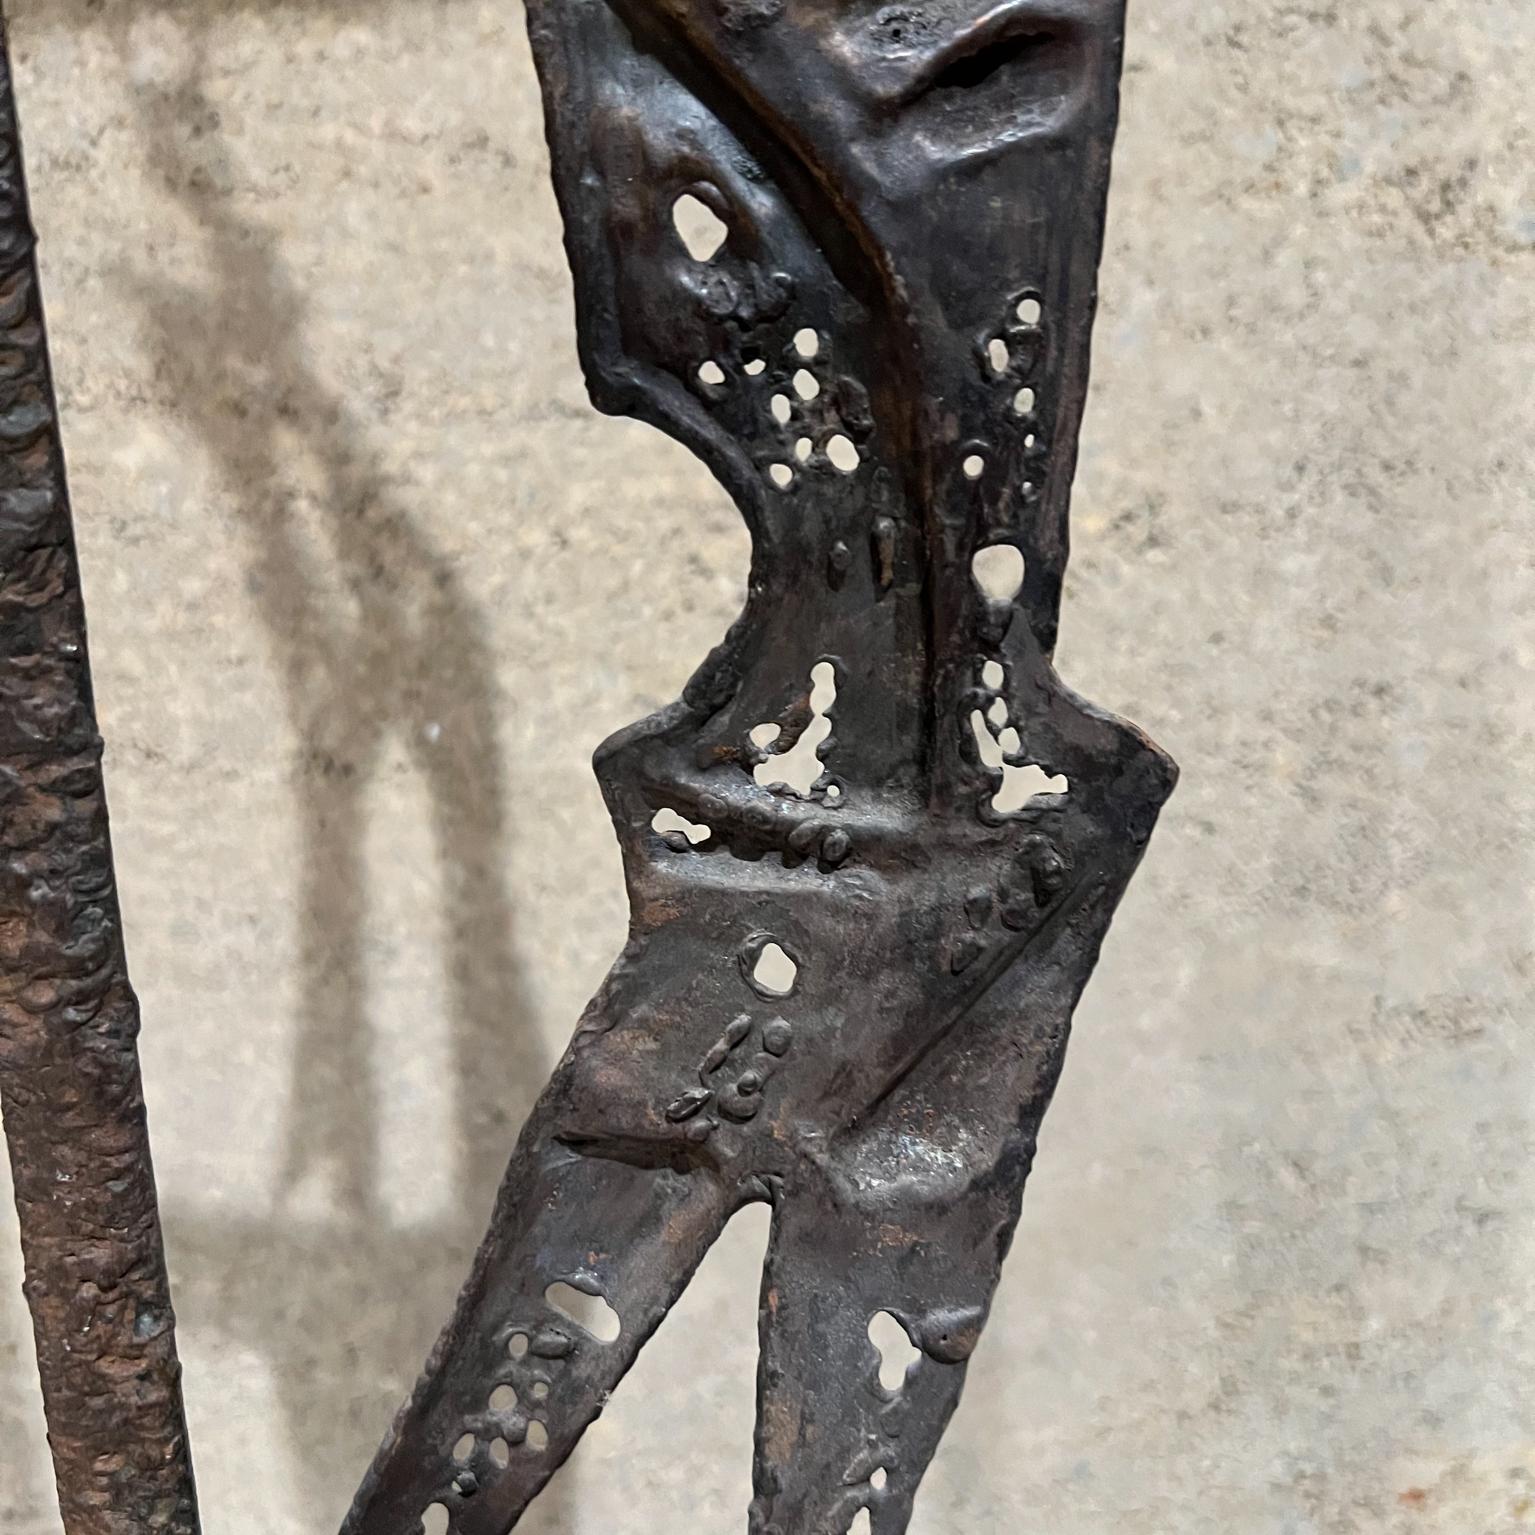 1970s Tortured Metal Sculpture Savior of Auschwitz by Emaus Mexico In Good Condition For Sale In Chula Vista, CA